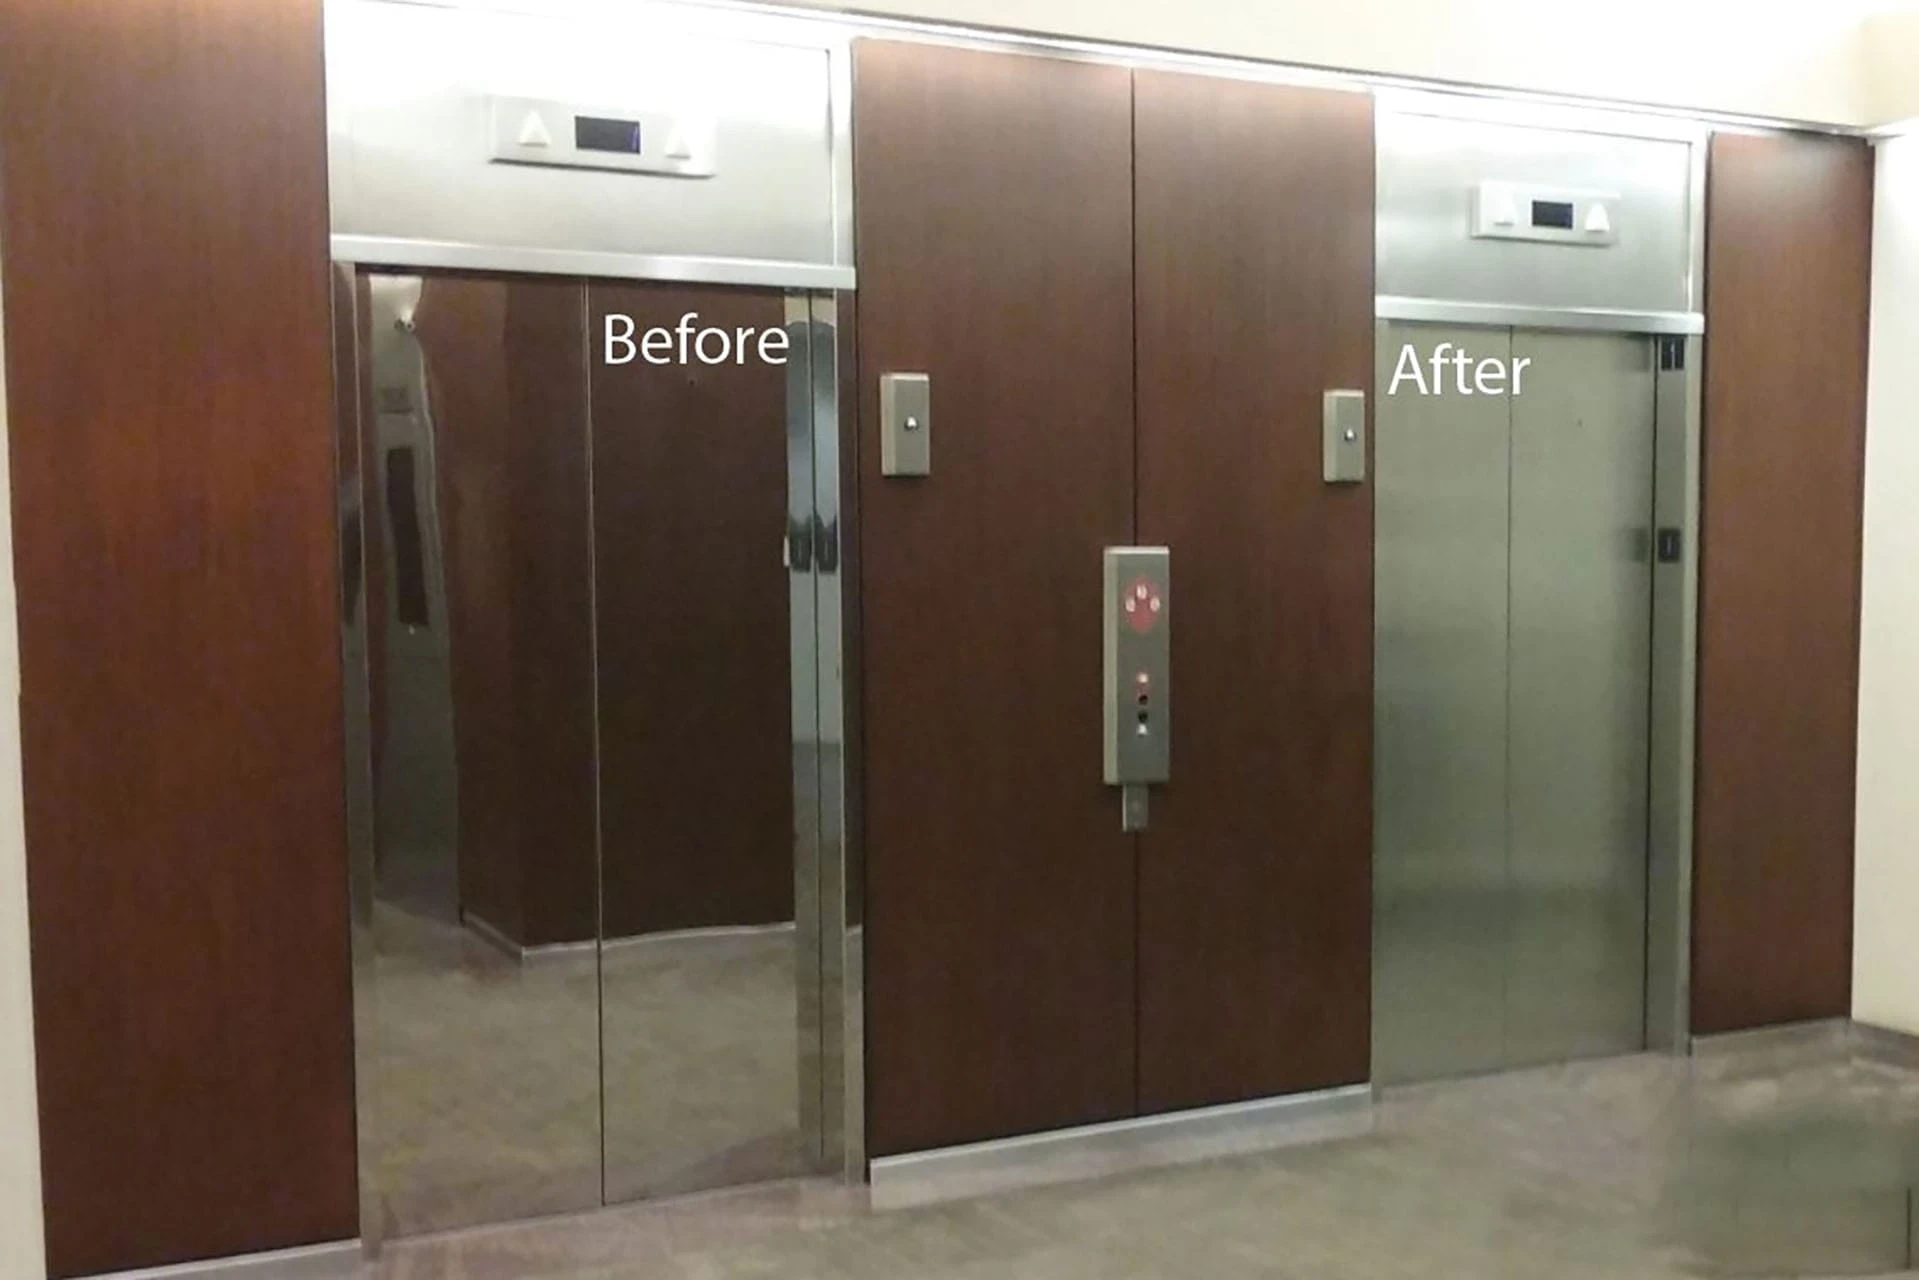 Mirrored to satin finish before and after image of elevator doors in an office building